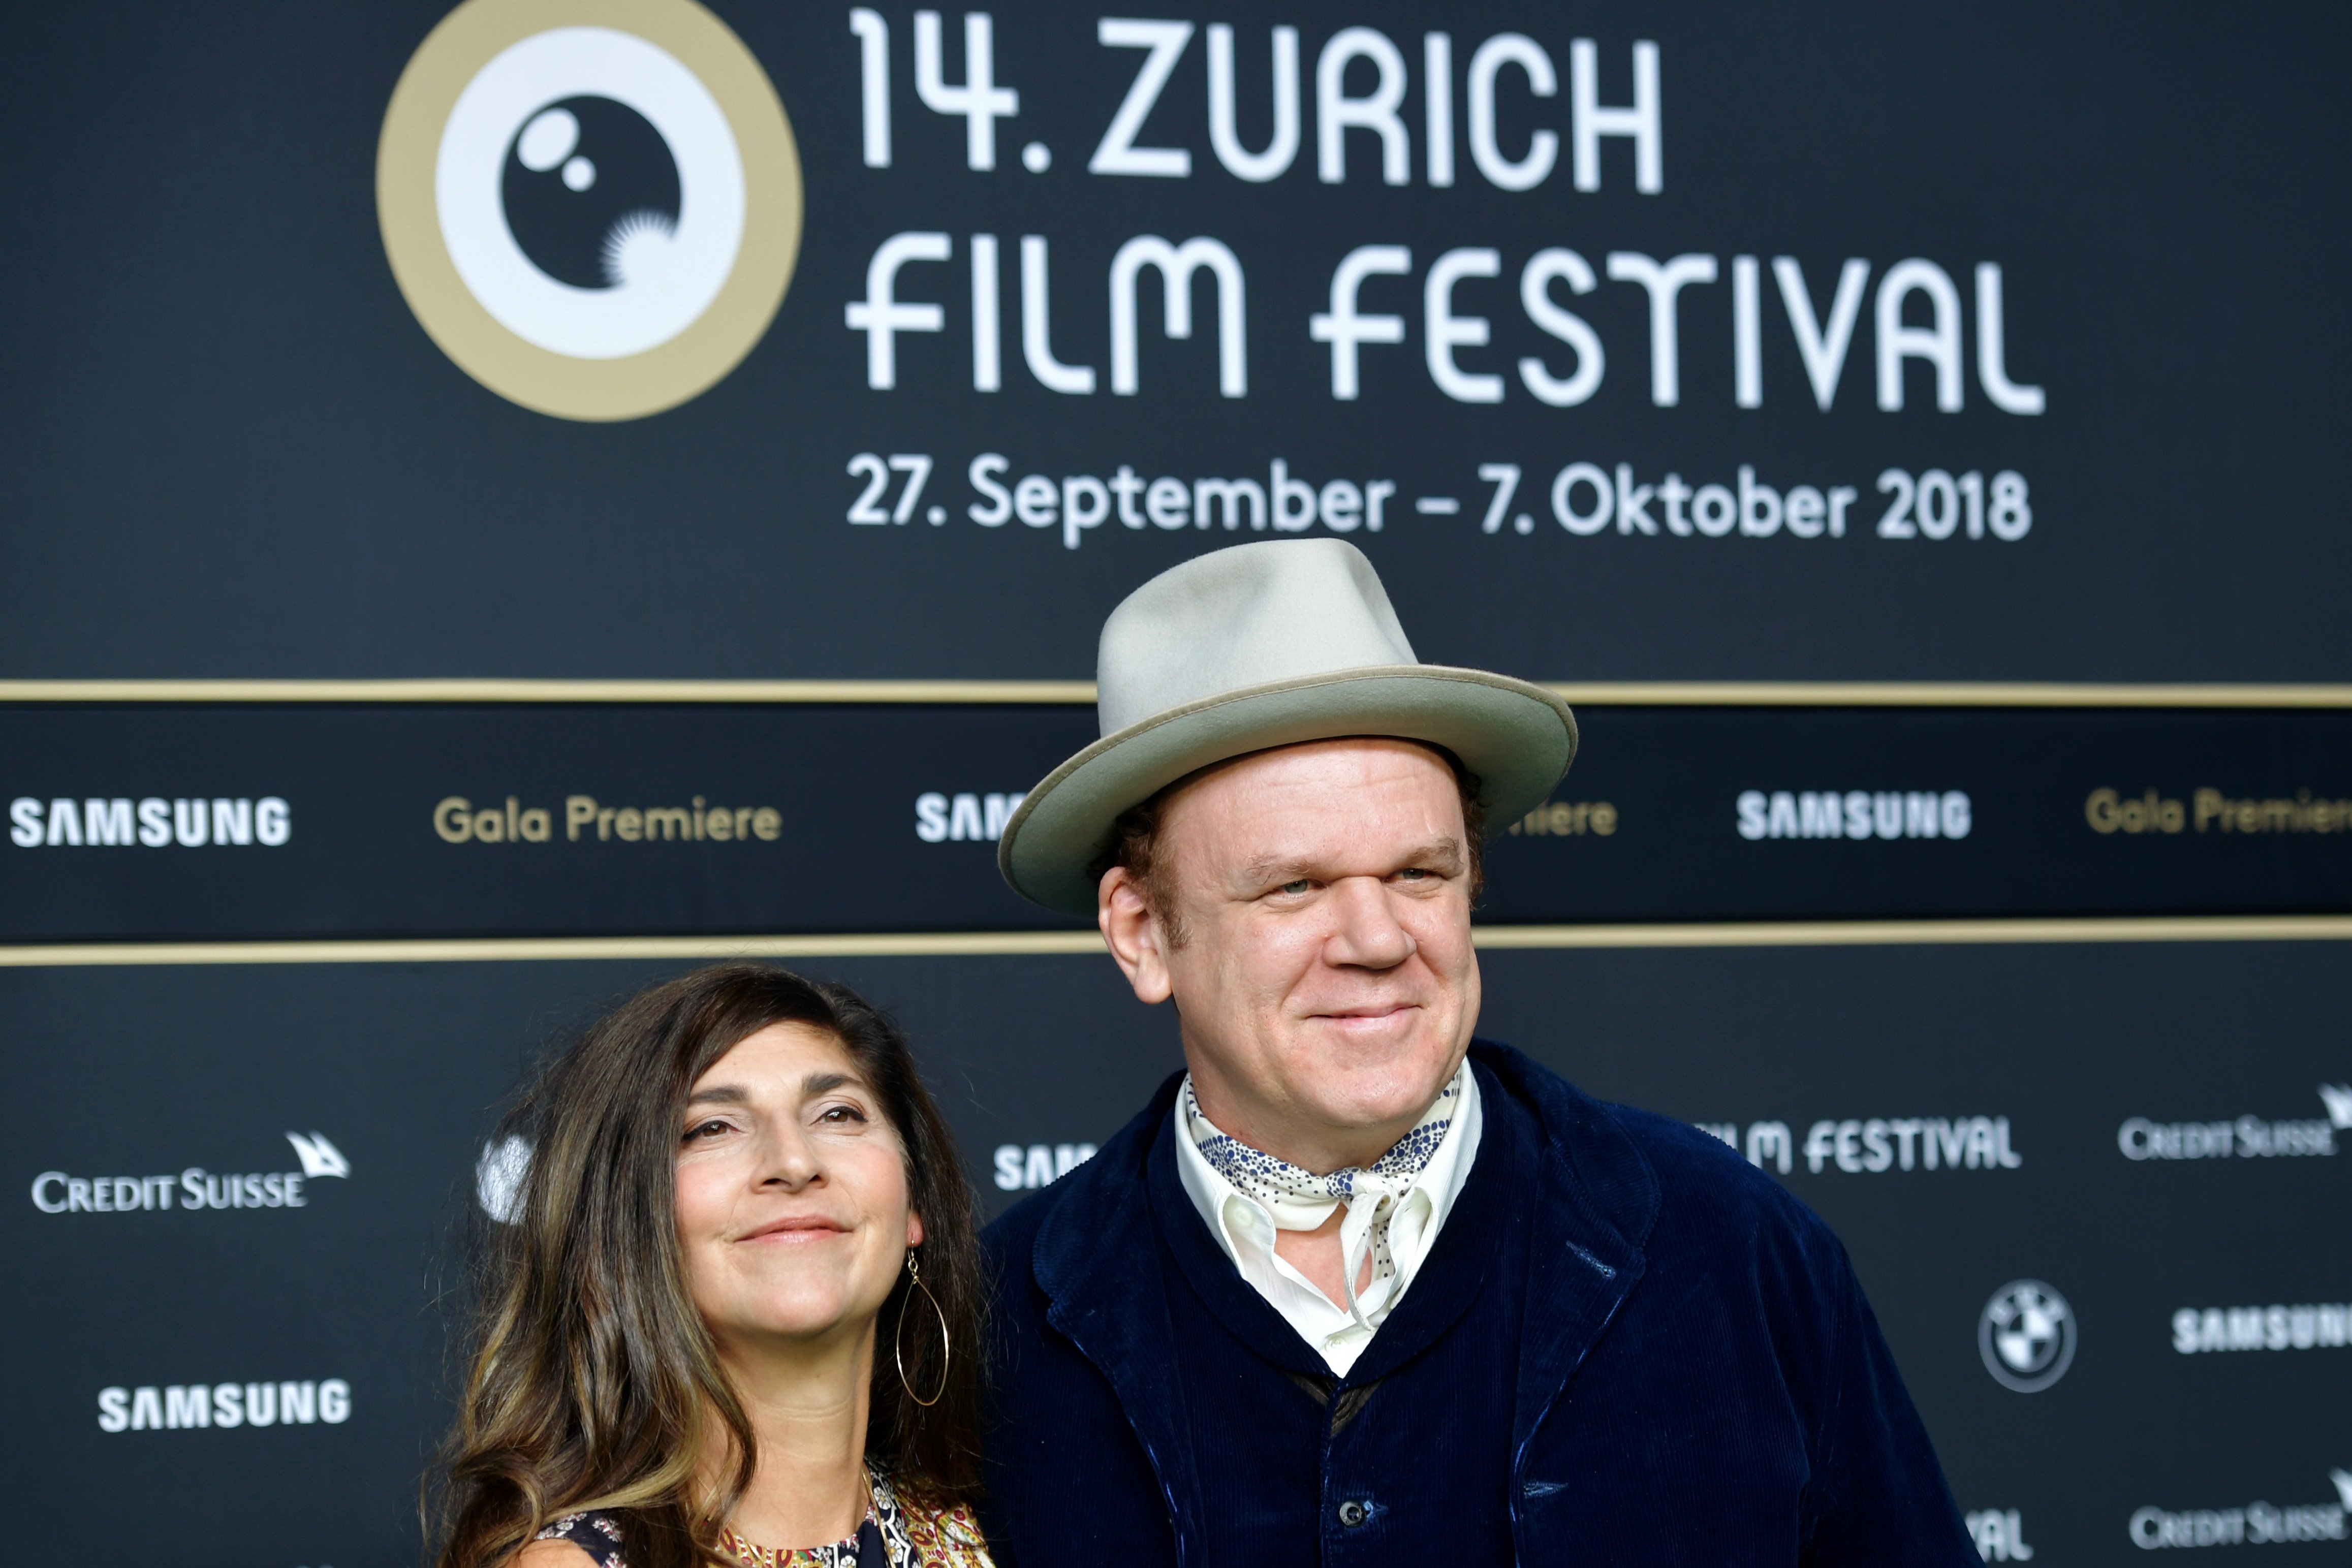 John C. Reilly and his wife Alison Dickey attend the 'The Sisters Brothers' premiere during the 14th Zurich Film Festival at Kino Corso on September 28, 2018 in Zurich, Switzerland. | Source: Getty Images